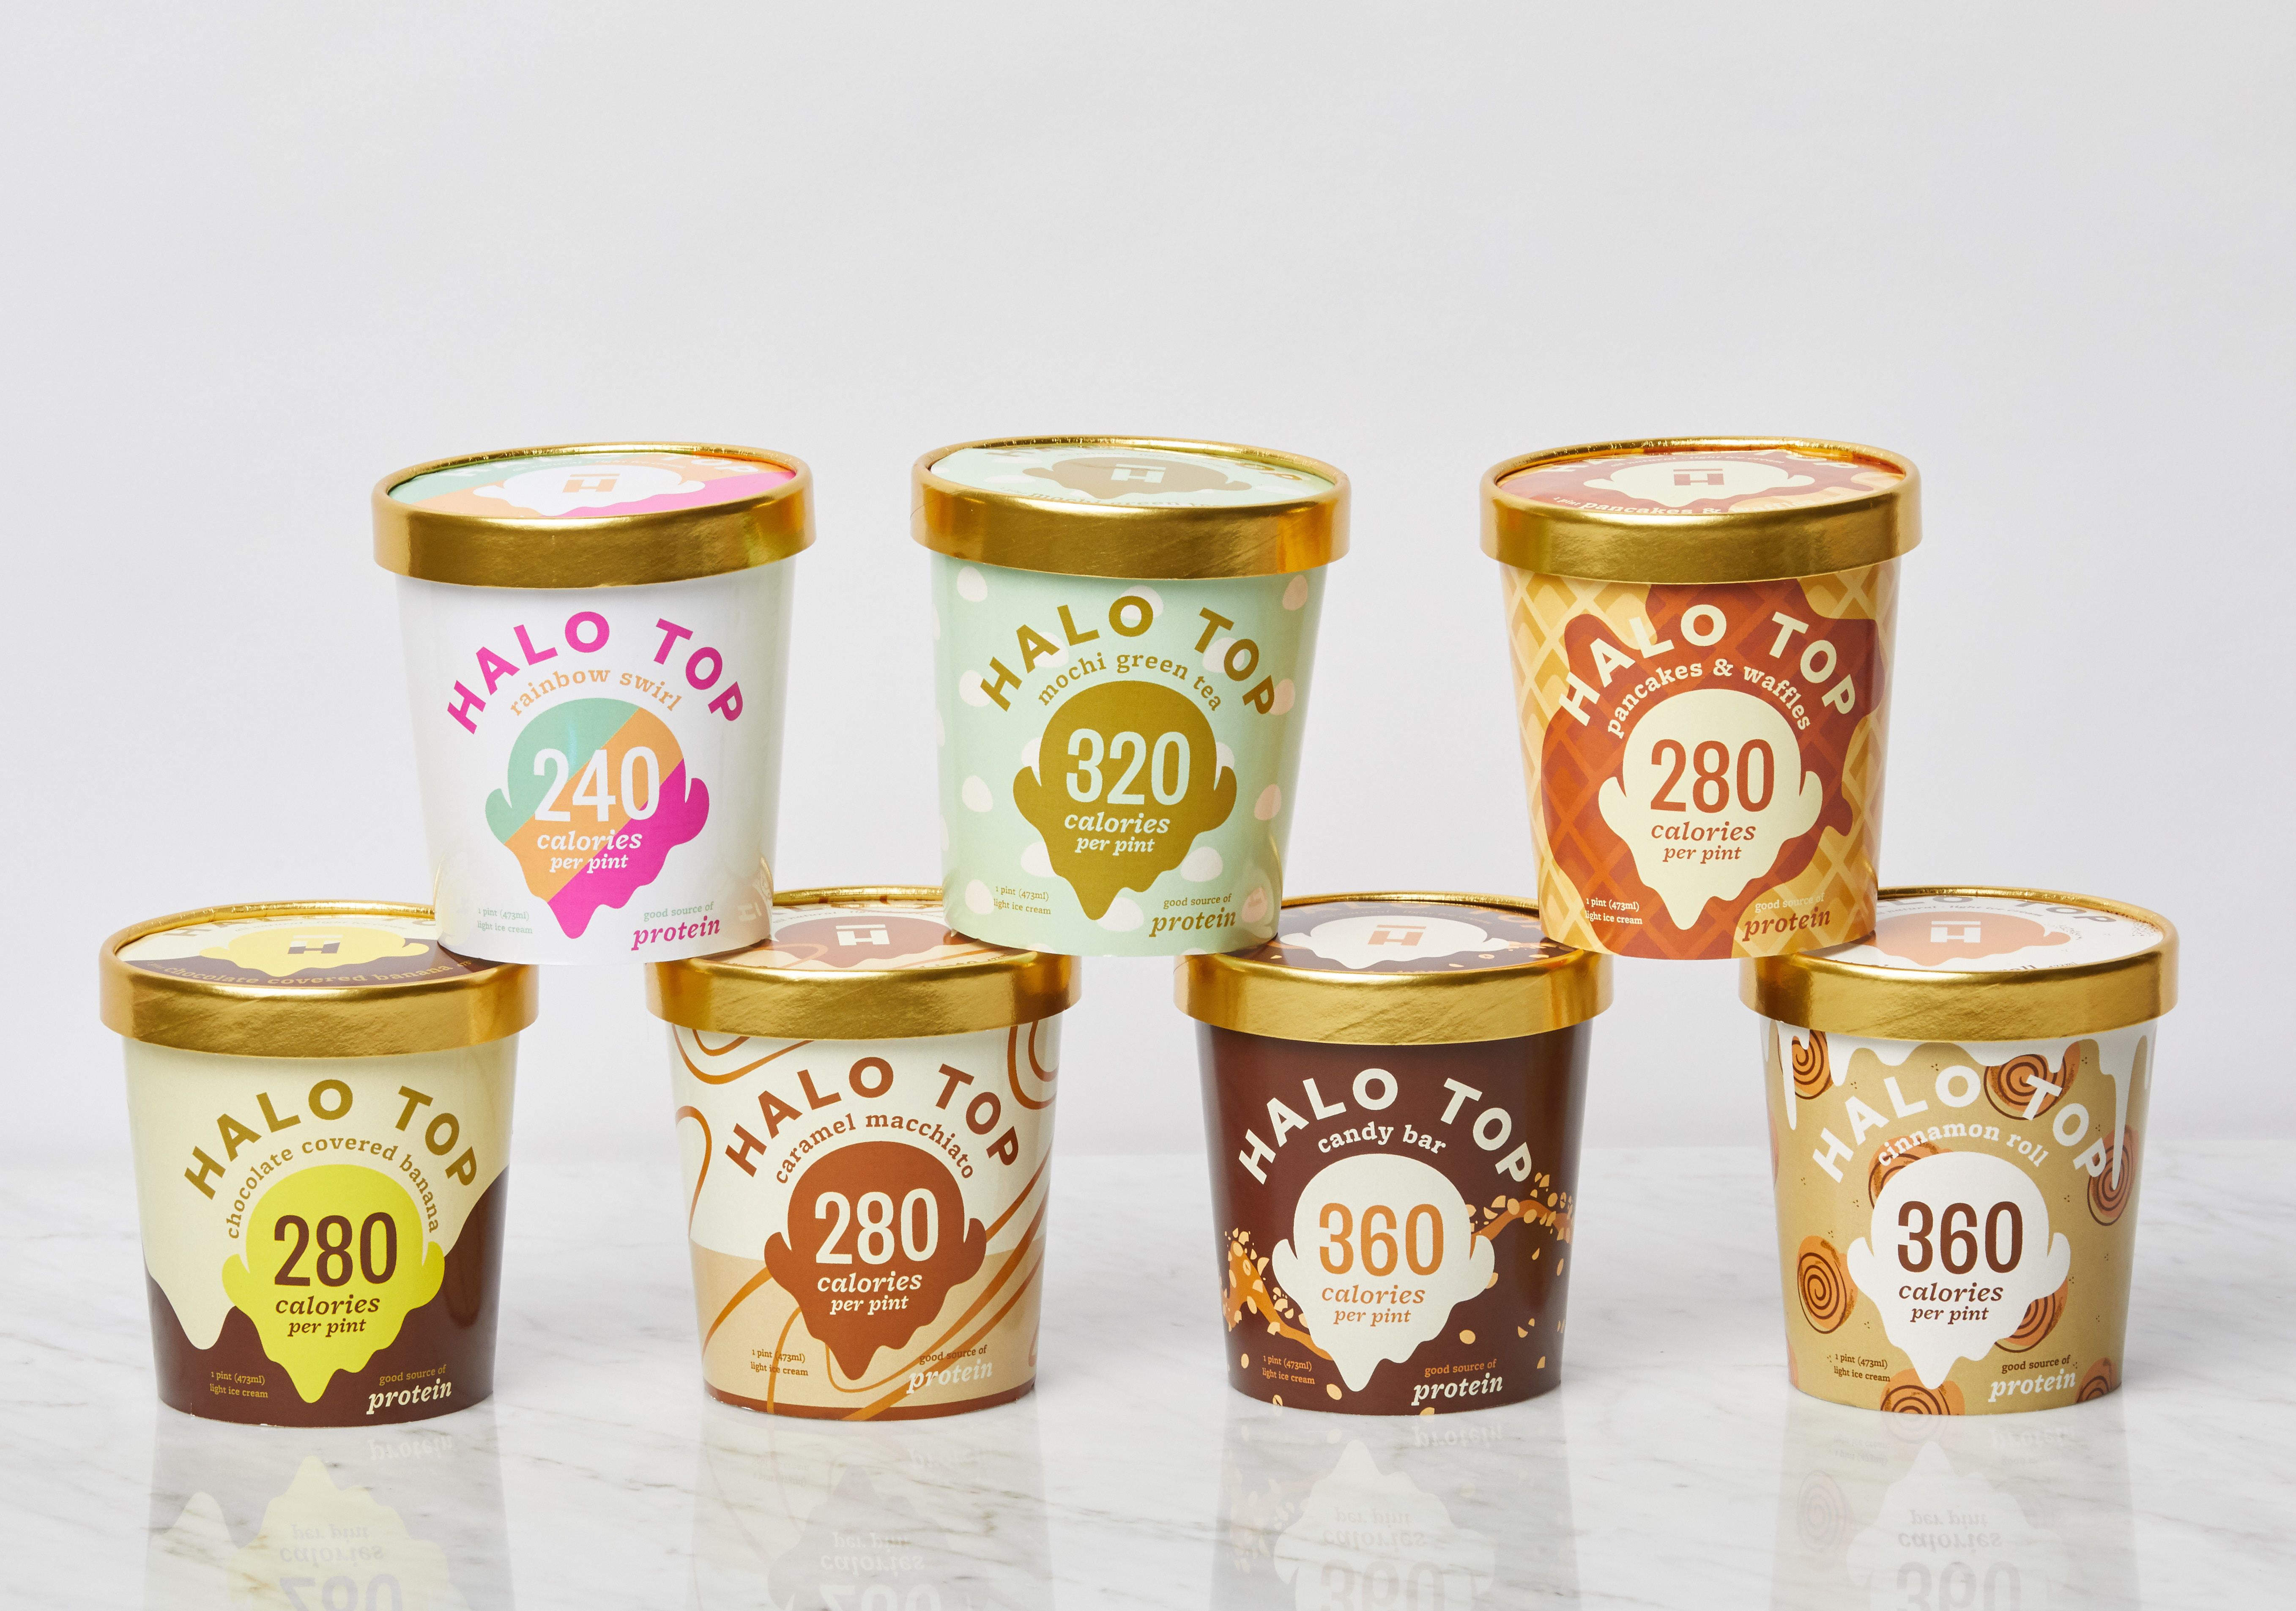 Halo Top Creamery, America's Best-Selling Pint, Unveils Seven New Flavors | Business